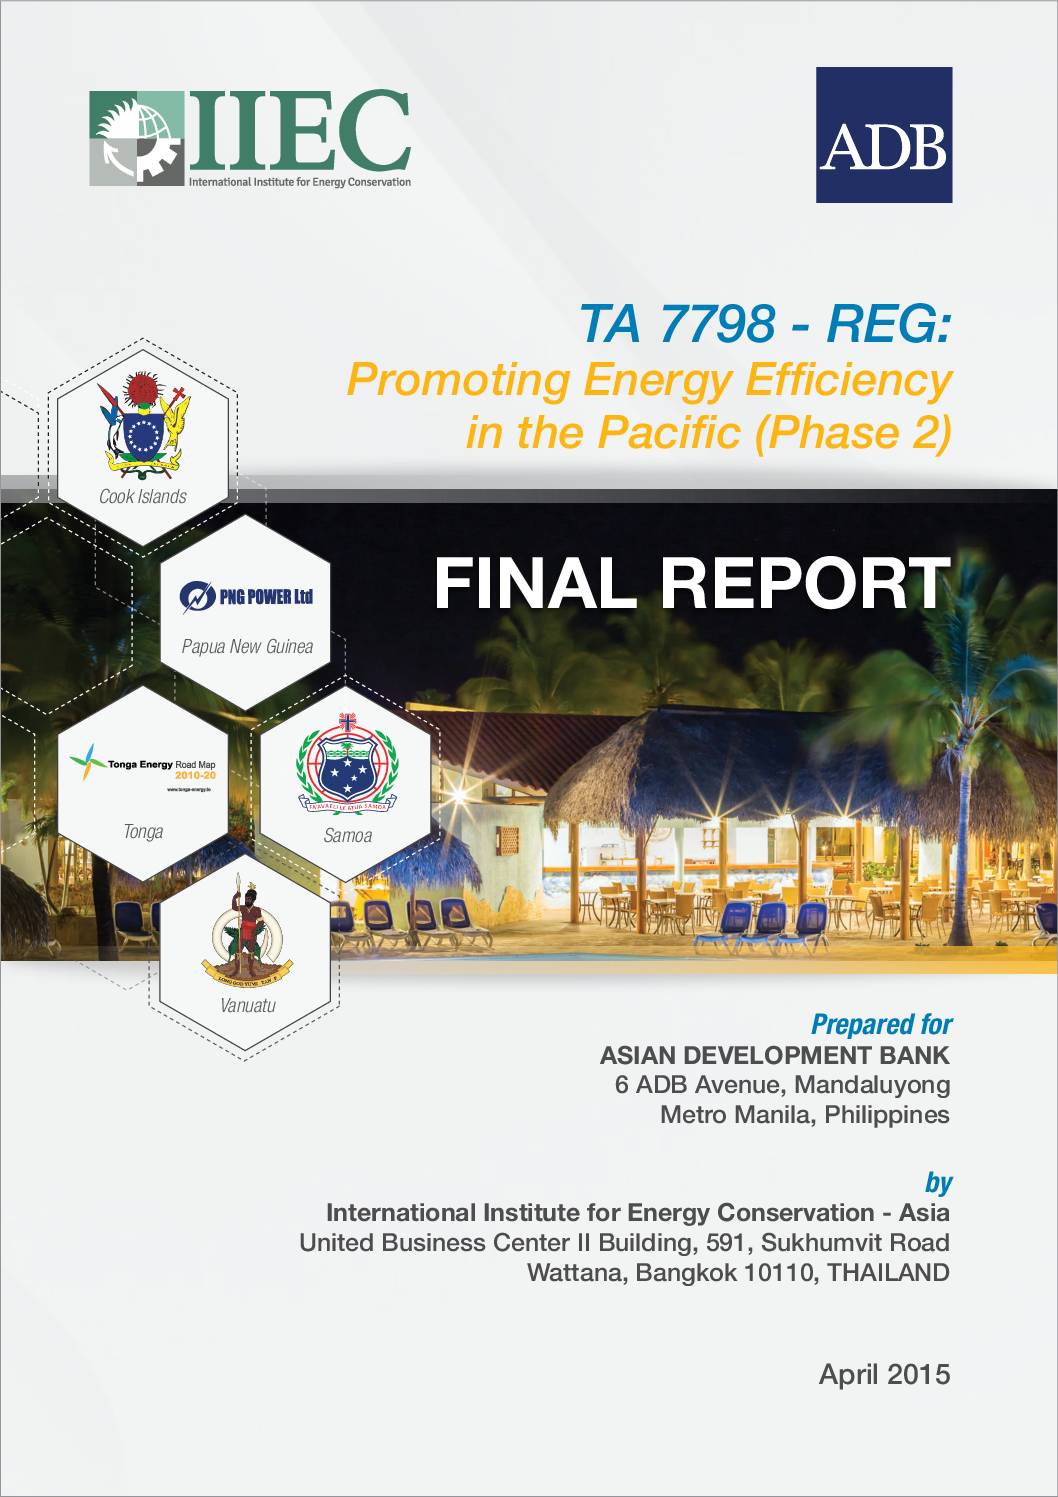 Promoting Energy Efficiency in the Pacific (Phase 2) Final Report